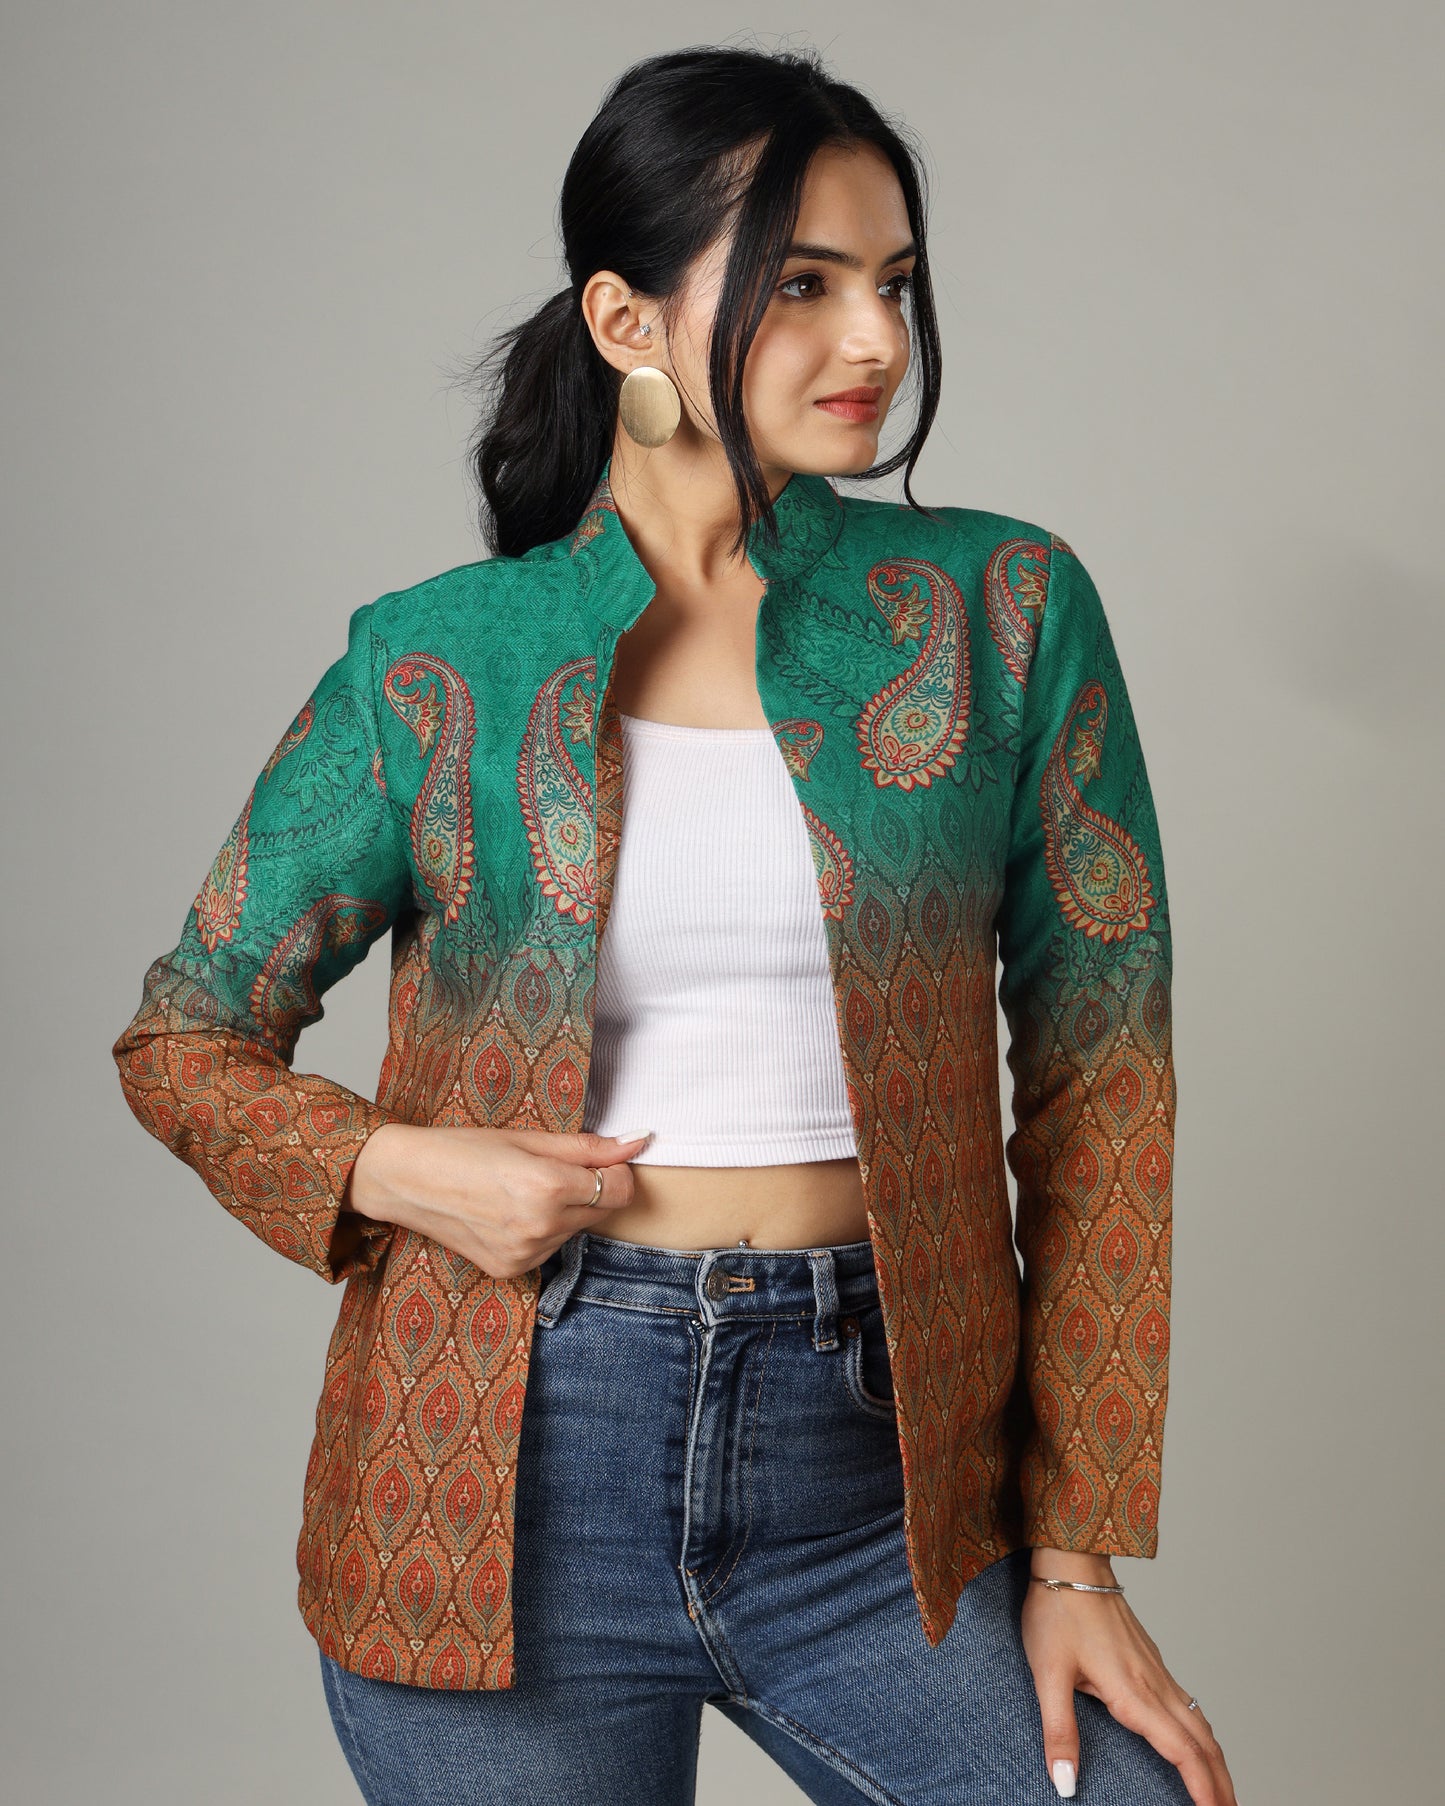 Expertly Crafted Superior Quality Ethnic Jacket